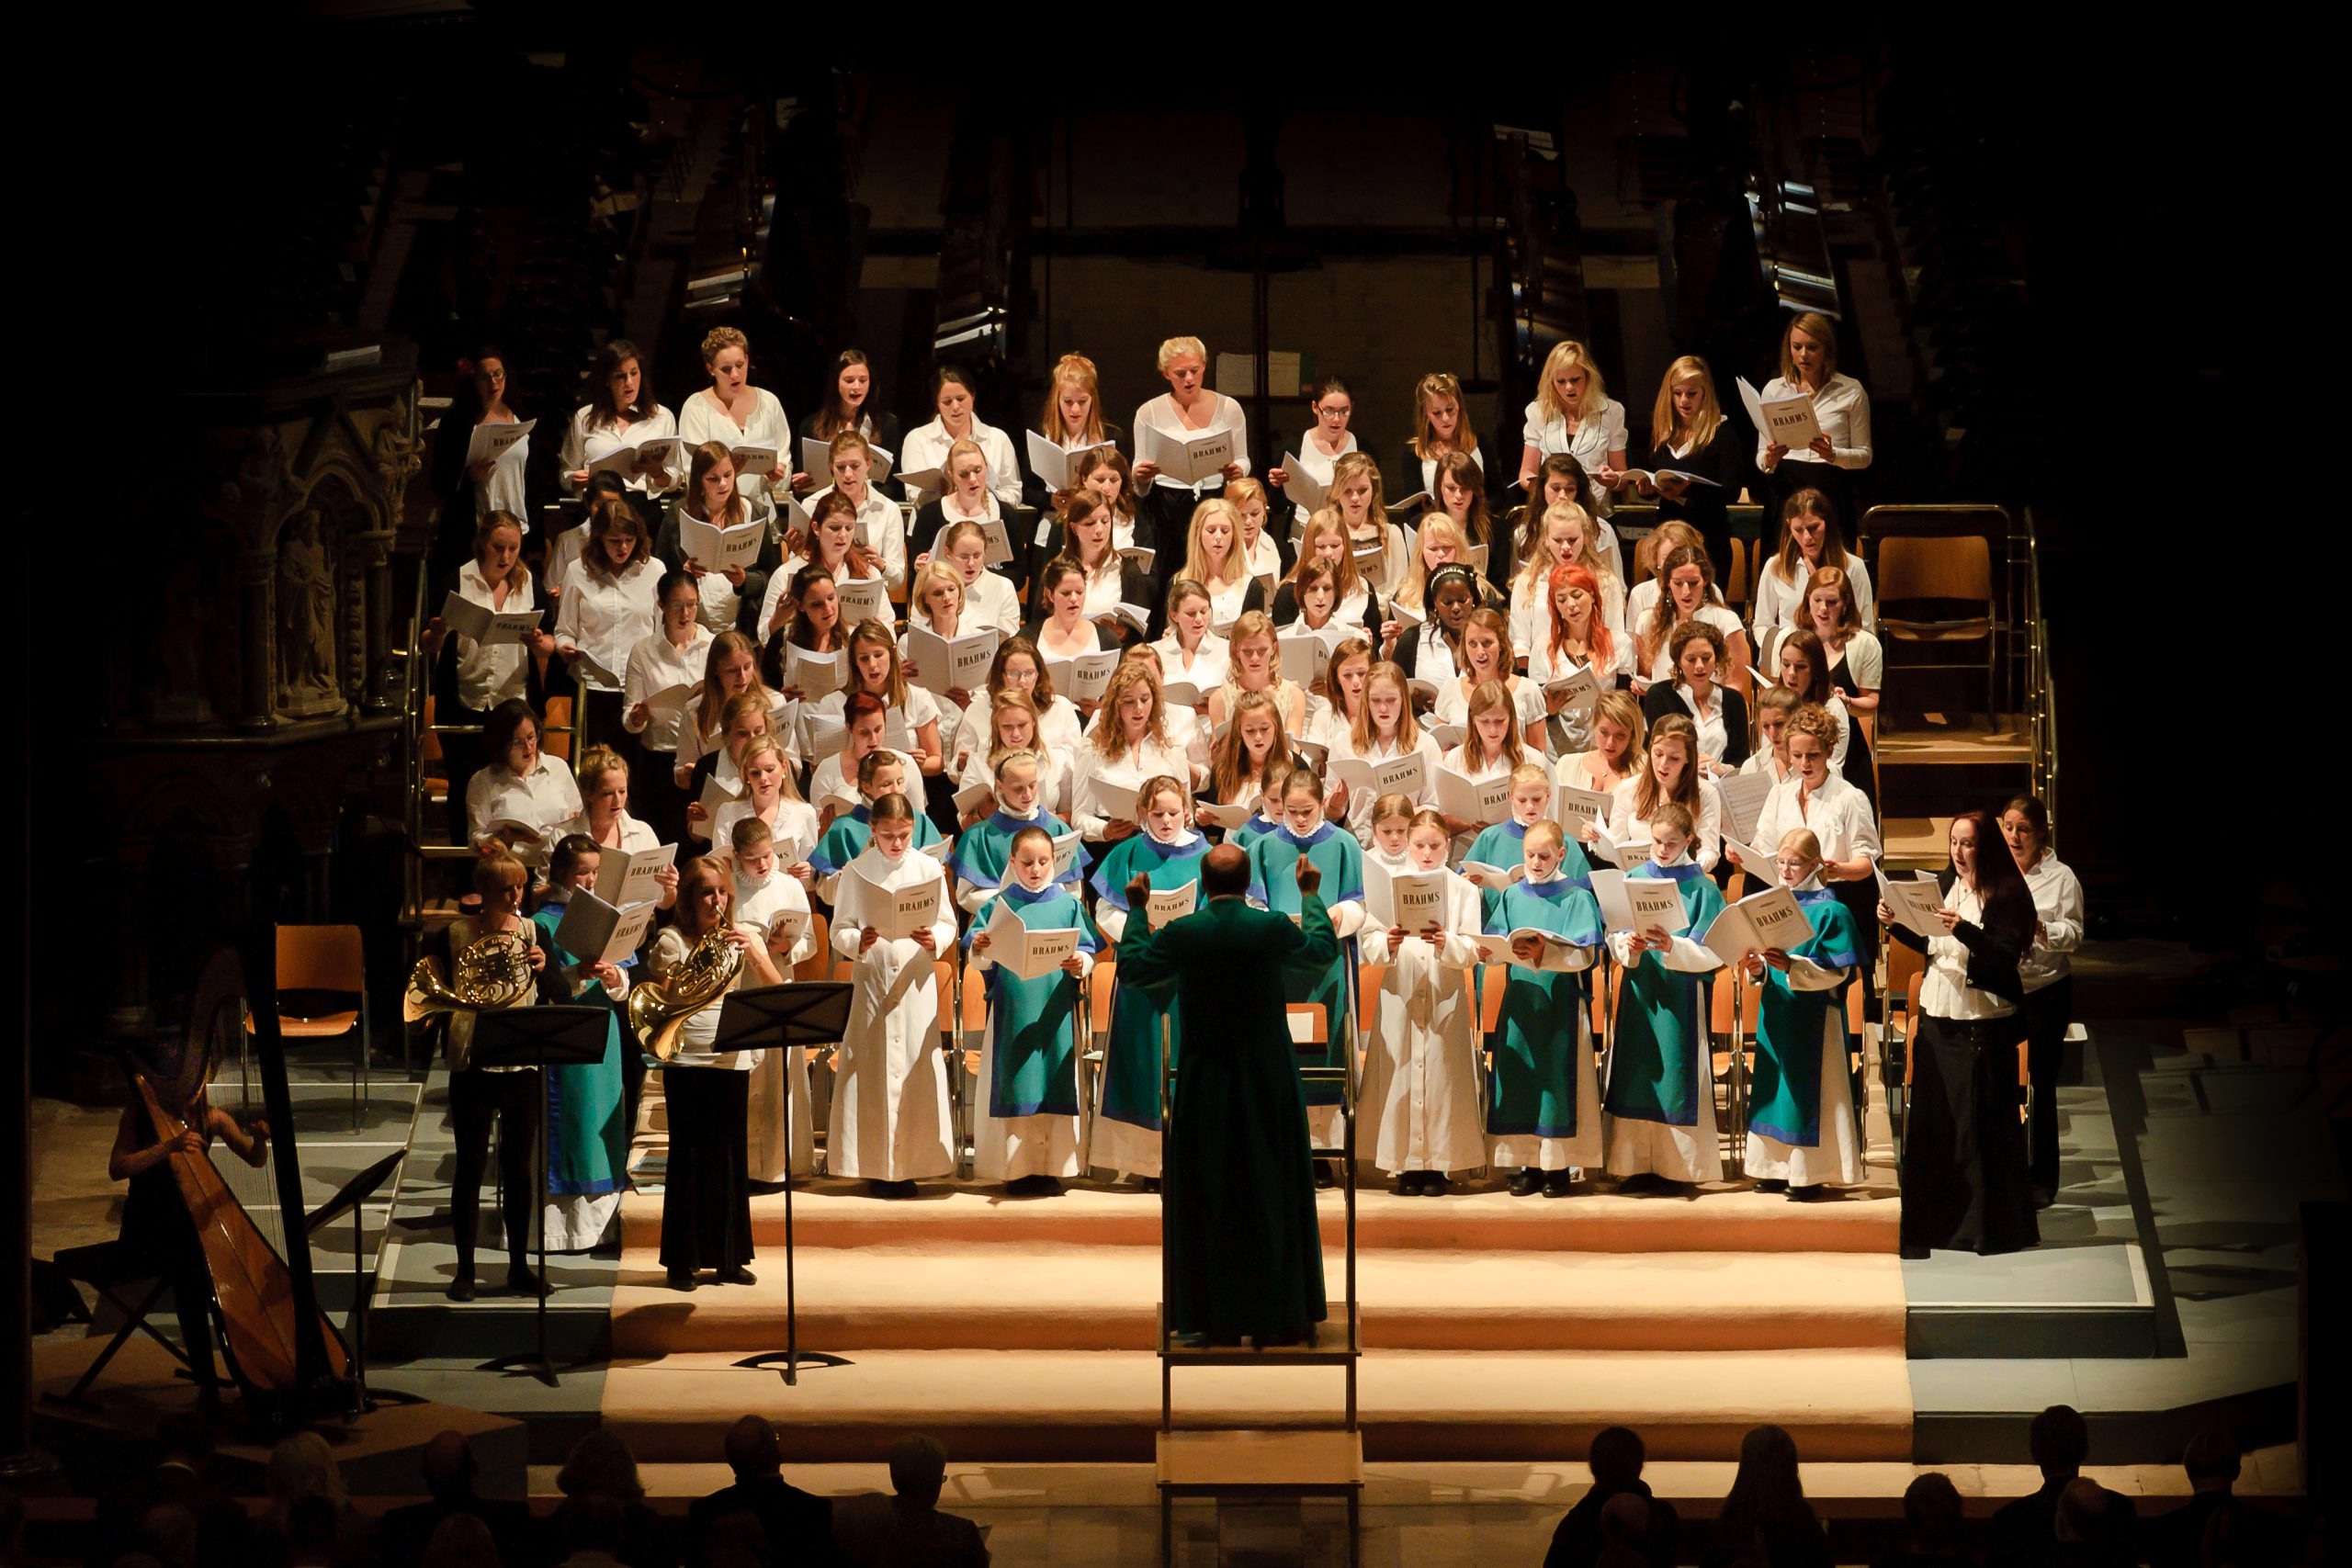 Their Royal Highnesses The Duke and Duchess of Gloucester to attend Concert celebrating 30th Anniversary of Girls Choir